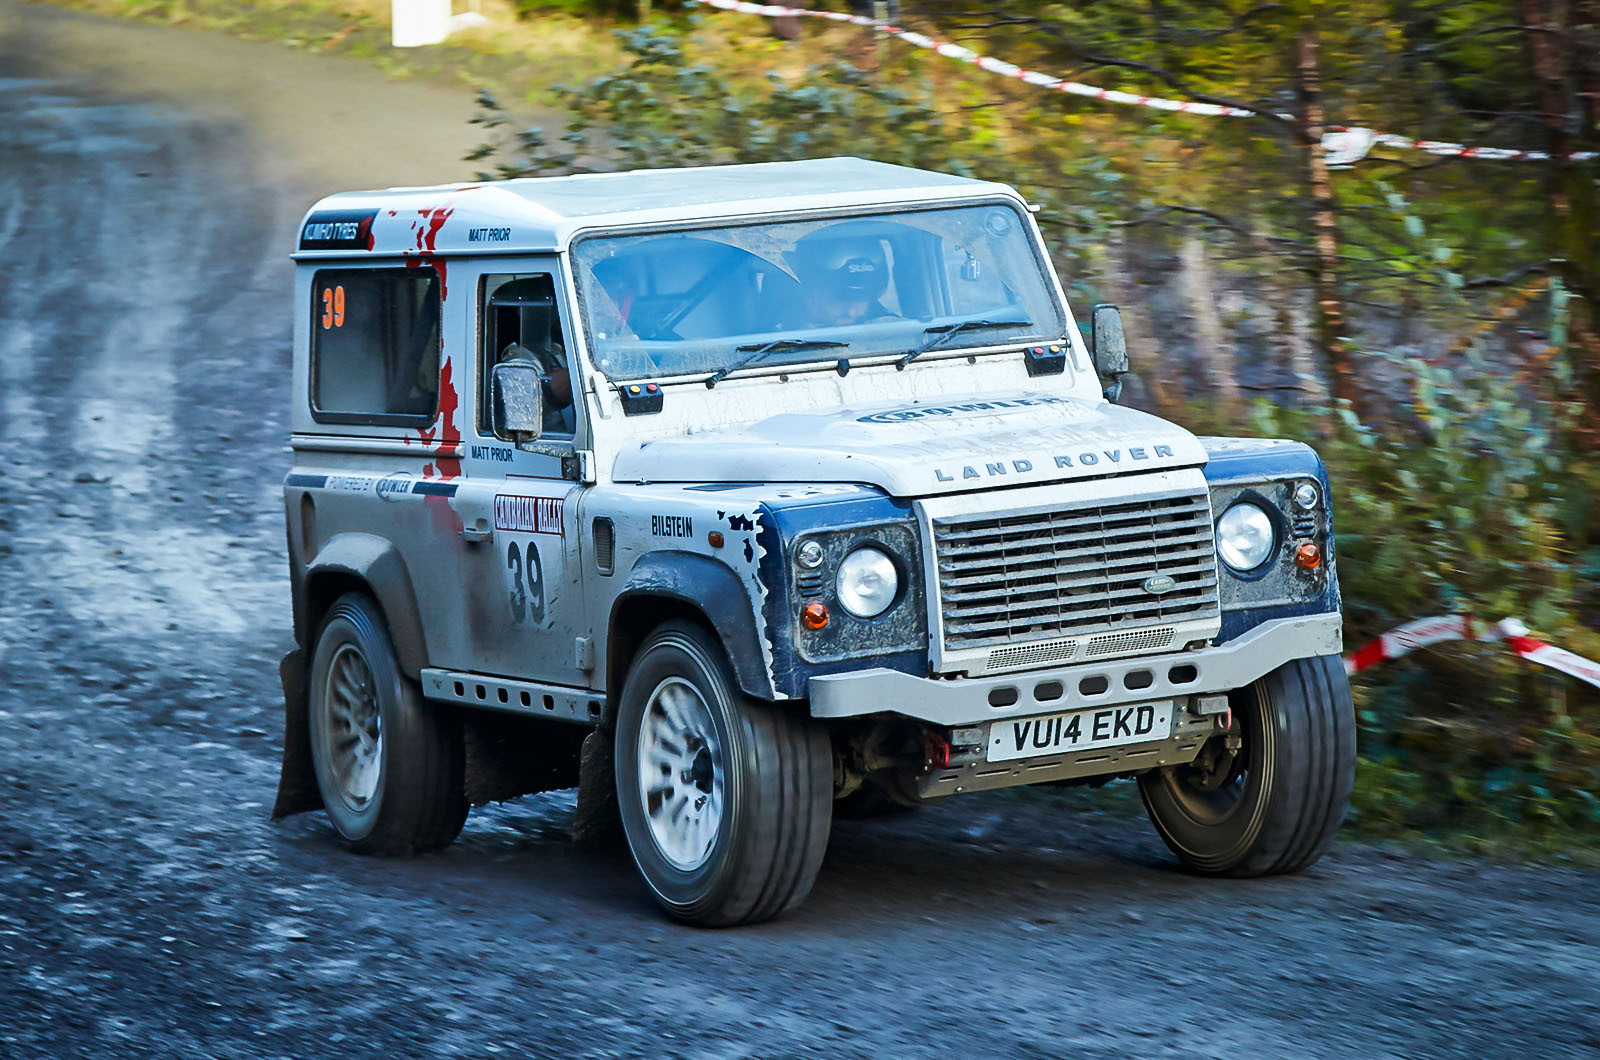 Rallying in the Land Rover Defender Challenge picture special